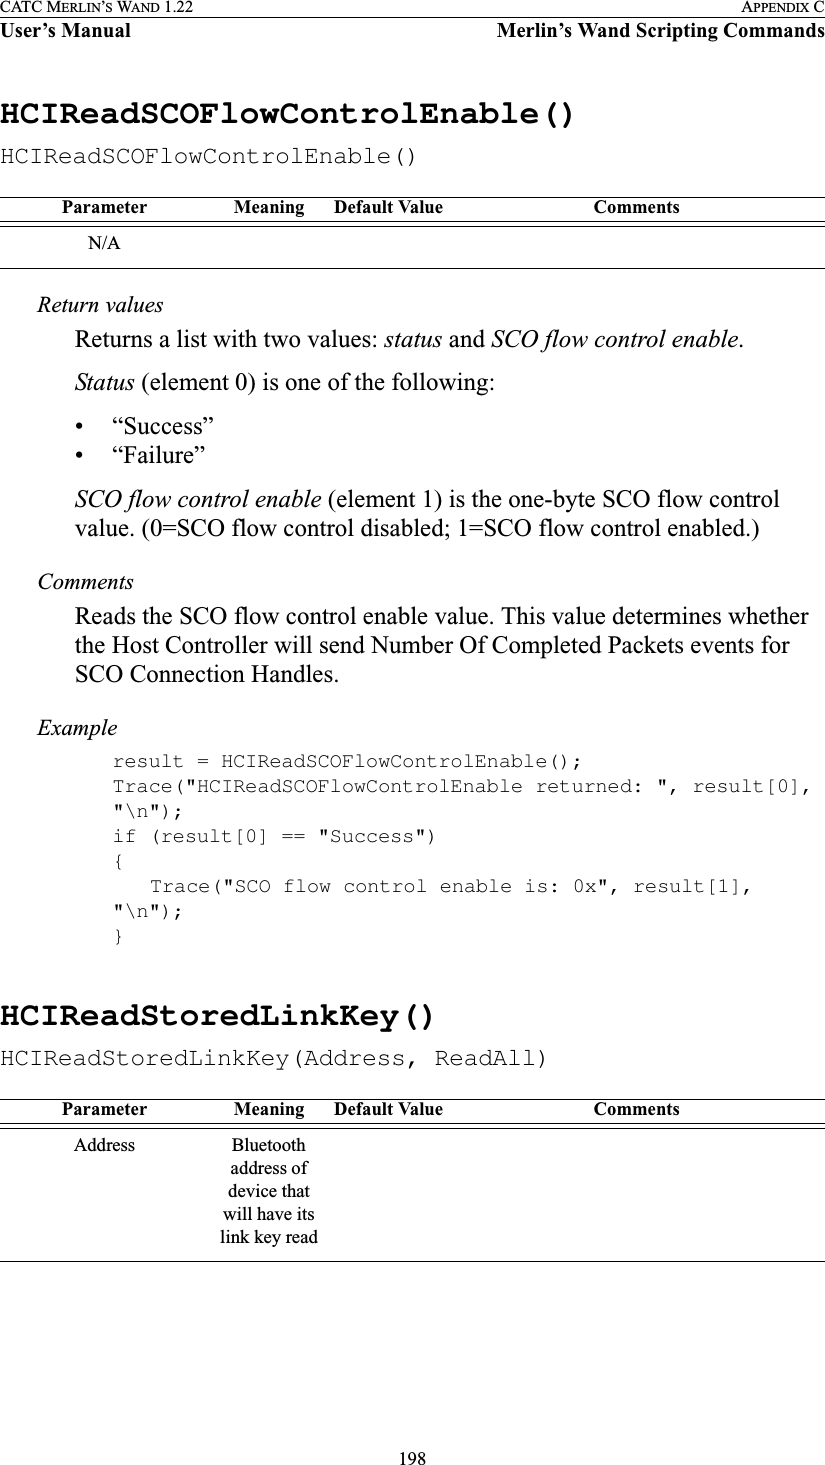 198CATC MERLIN’S WAND 1.22 APPENDIX CUser’s Manual Merlin’s Wand Scripting CommandsHCIReadSCOFlowControlEnable()HCIReadSCOFlowControlEnable()Return valuesReturns a list with two values: status and SCO flow control enable.Status (element 0) is one of the following:• “Success”• “Failure”SCO flow control enable (element 1) is the one-byte SCO flow control value. (0=SCO flow control disabled; 1=SCO flow control enabled.)CommentsReads the SCO flow control enable value. This value determines whether the Host Controller will send Number Of Completed Packets events for SCO Connection Handles.Exampleresult = HCIReadSCOFlowControlEnable();Trace(&quot;HCIReadSCOFlowControlEnable returned: &quot;, result[0], &quot;\n&quot;);if (result[0] == &quot;Success&quot;){Trace(&quot;SCO flow control enable is: 0x&quot;, result[1], &quot;\n&quot;);}HCIReadStoredLinkKey()HCIReadStoredLinkKey(Address, ReadAll)Parameter Meaning Default Value CommentsN/AParameter Meaning Default Value CommentsAddress Bluetooth address of device that will have its link key read